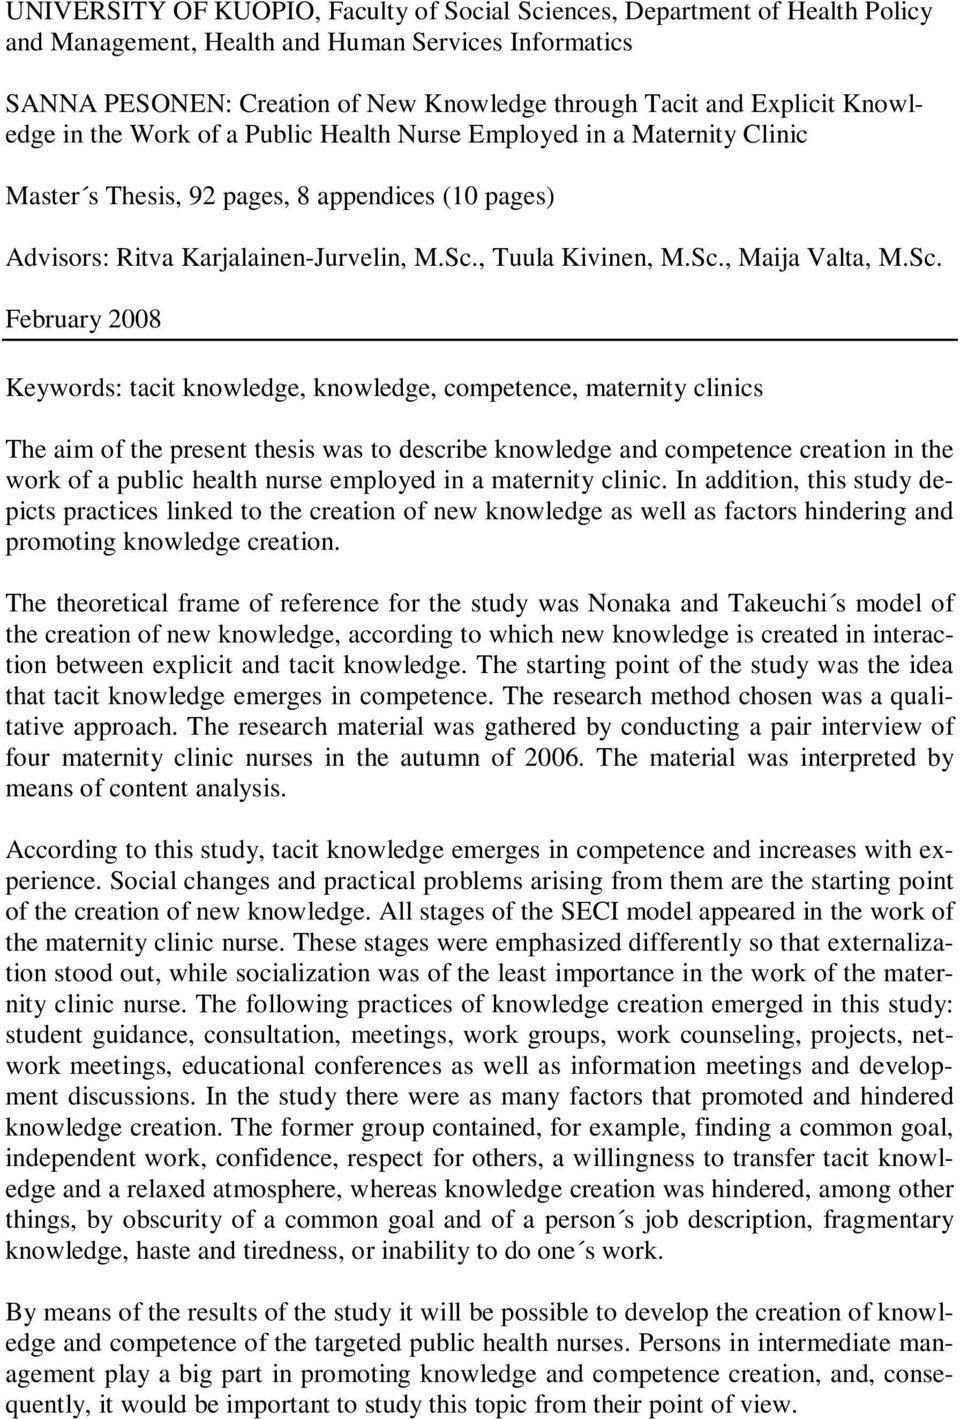 Sc. February 2008 Keywords: tacit knowledge, knowledge, competence, maternity clinics The aim of the present thesis was to describe knowledge and competence creation in the work of a public health